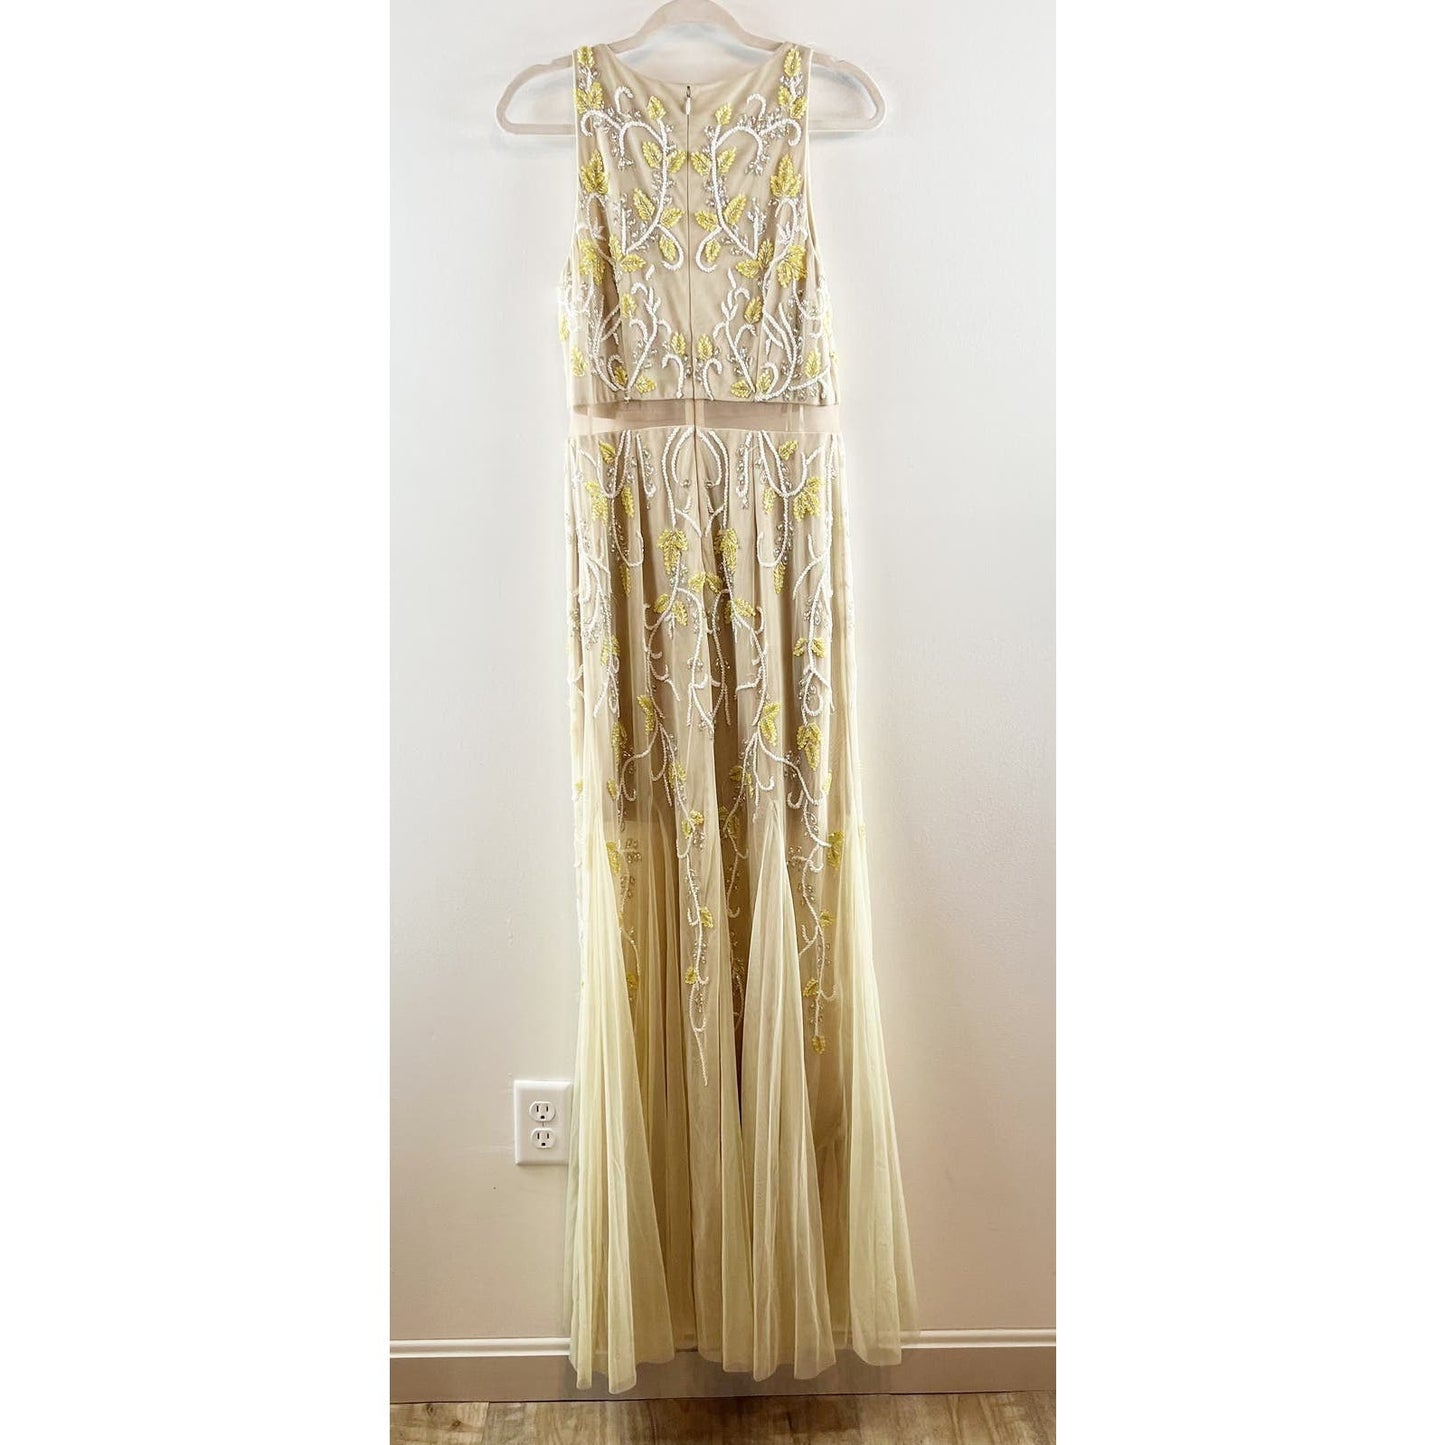 Adrianna Papell Sheer Floral Beaded Lined Halter Neck Maxi Gown Dress Cream 10